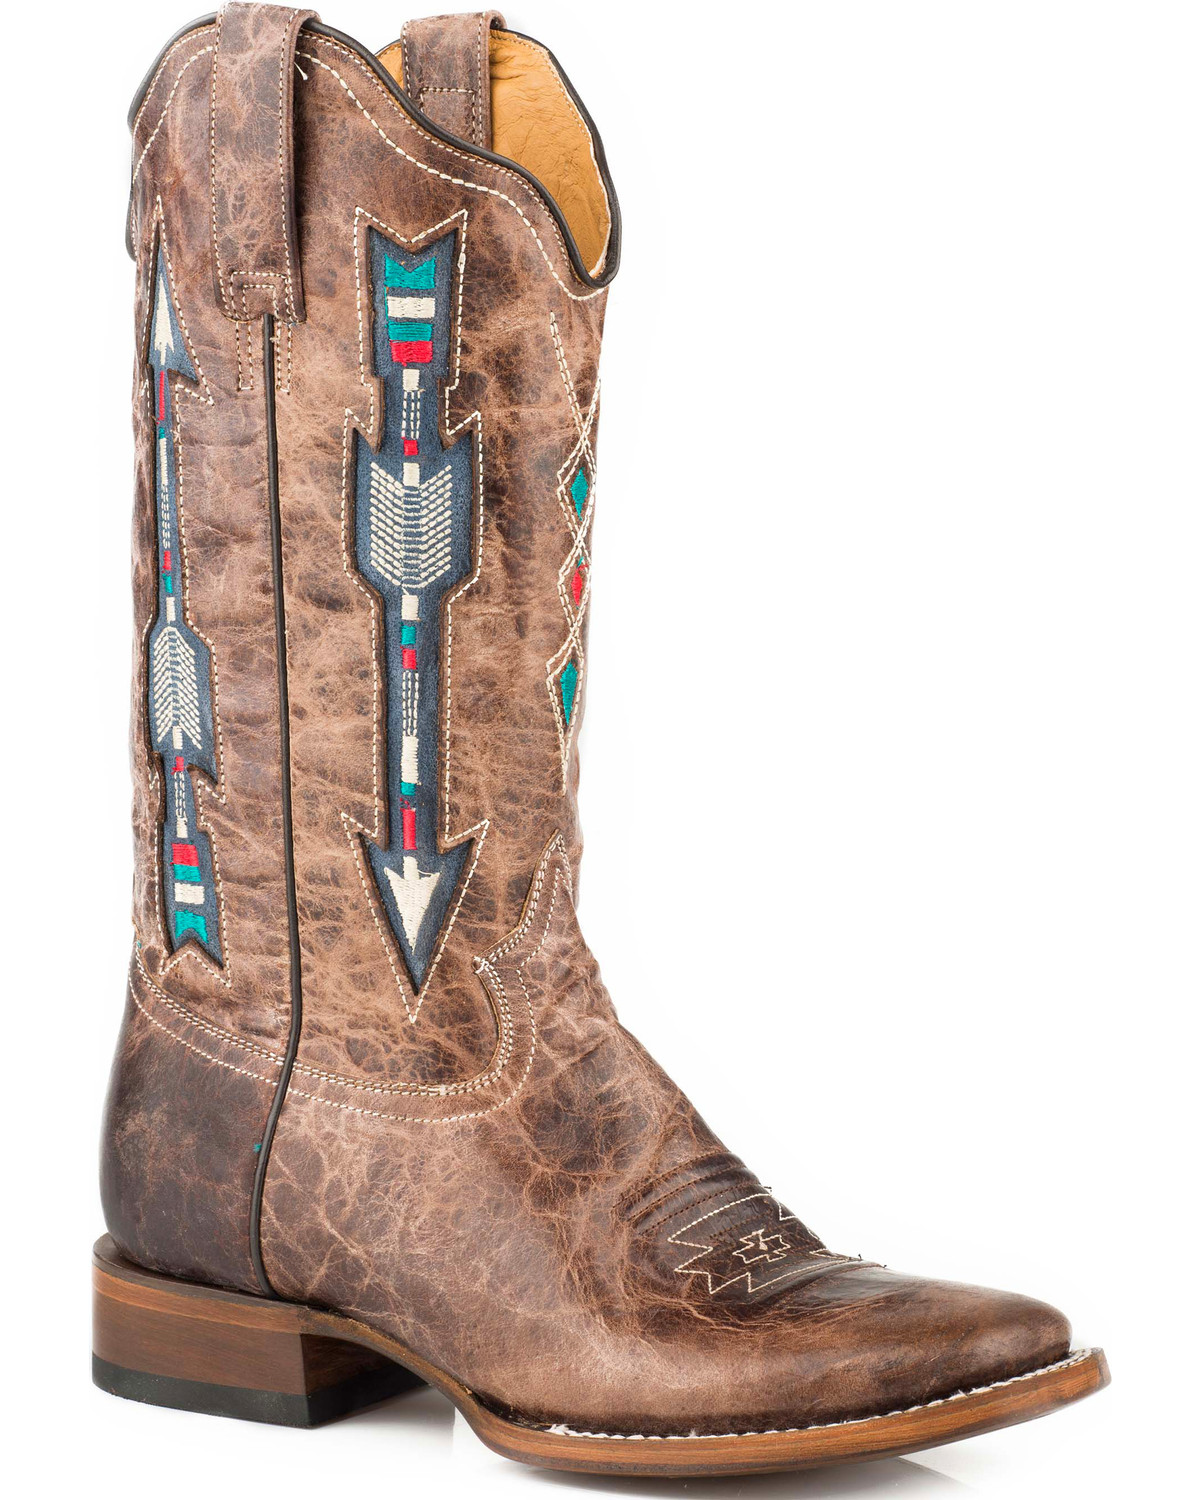 Roper Women's Arrow Inlay Western Boots - Broad Square Toe